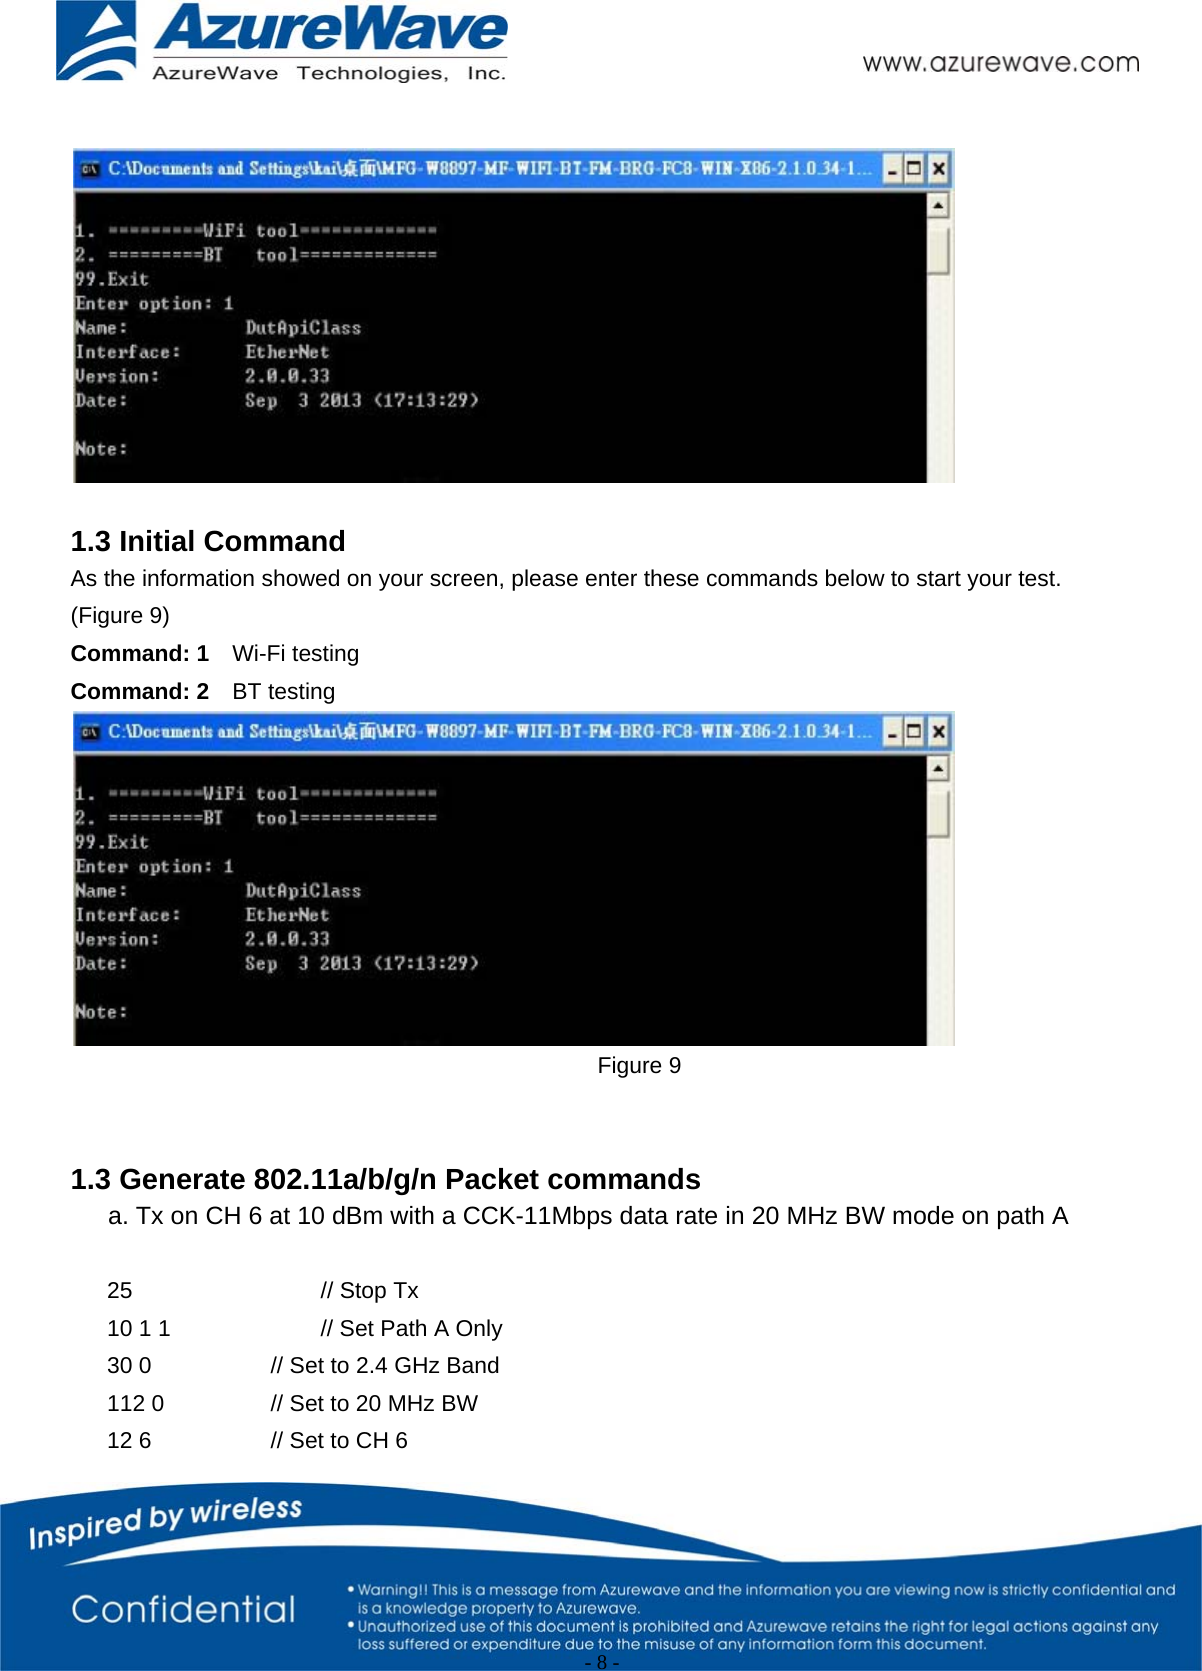                                                   - 8 -      1.3 Initial Command As the information showed on your screen, please enter these commands below to start your test. (Figure 9) Command: 1    Wi-Fi testing   Command: 2    BT testing    Figure 9   1.3 Generate 802.11a/b/g/n Packet commands a. Tx on CH 6 at 10 dBm with a CCK-11Mbps data rate in 20 MHz BW mode on path A  25    // Stop Tx 10 1 1      // Set Path A Only 30 0      // Set to 2.4 GHz Band 112 0     // Set to 20 MHz BW 12 6      // Set to CH 6 